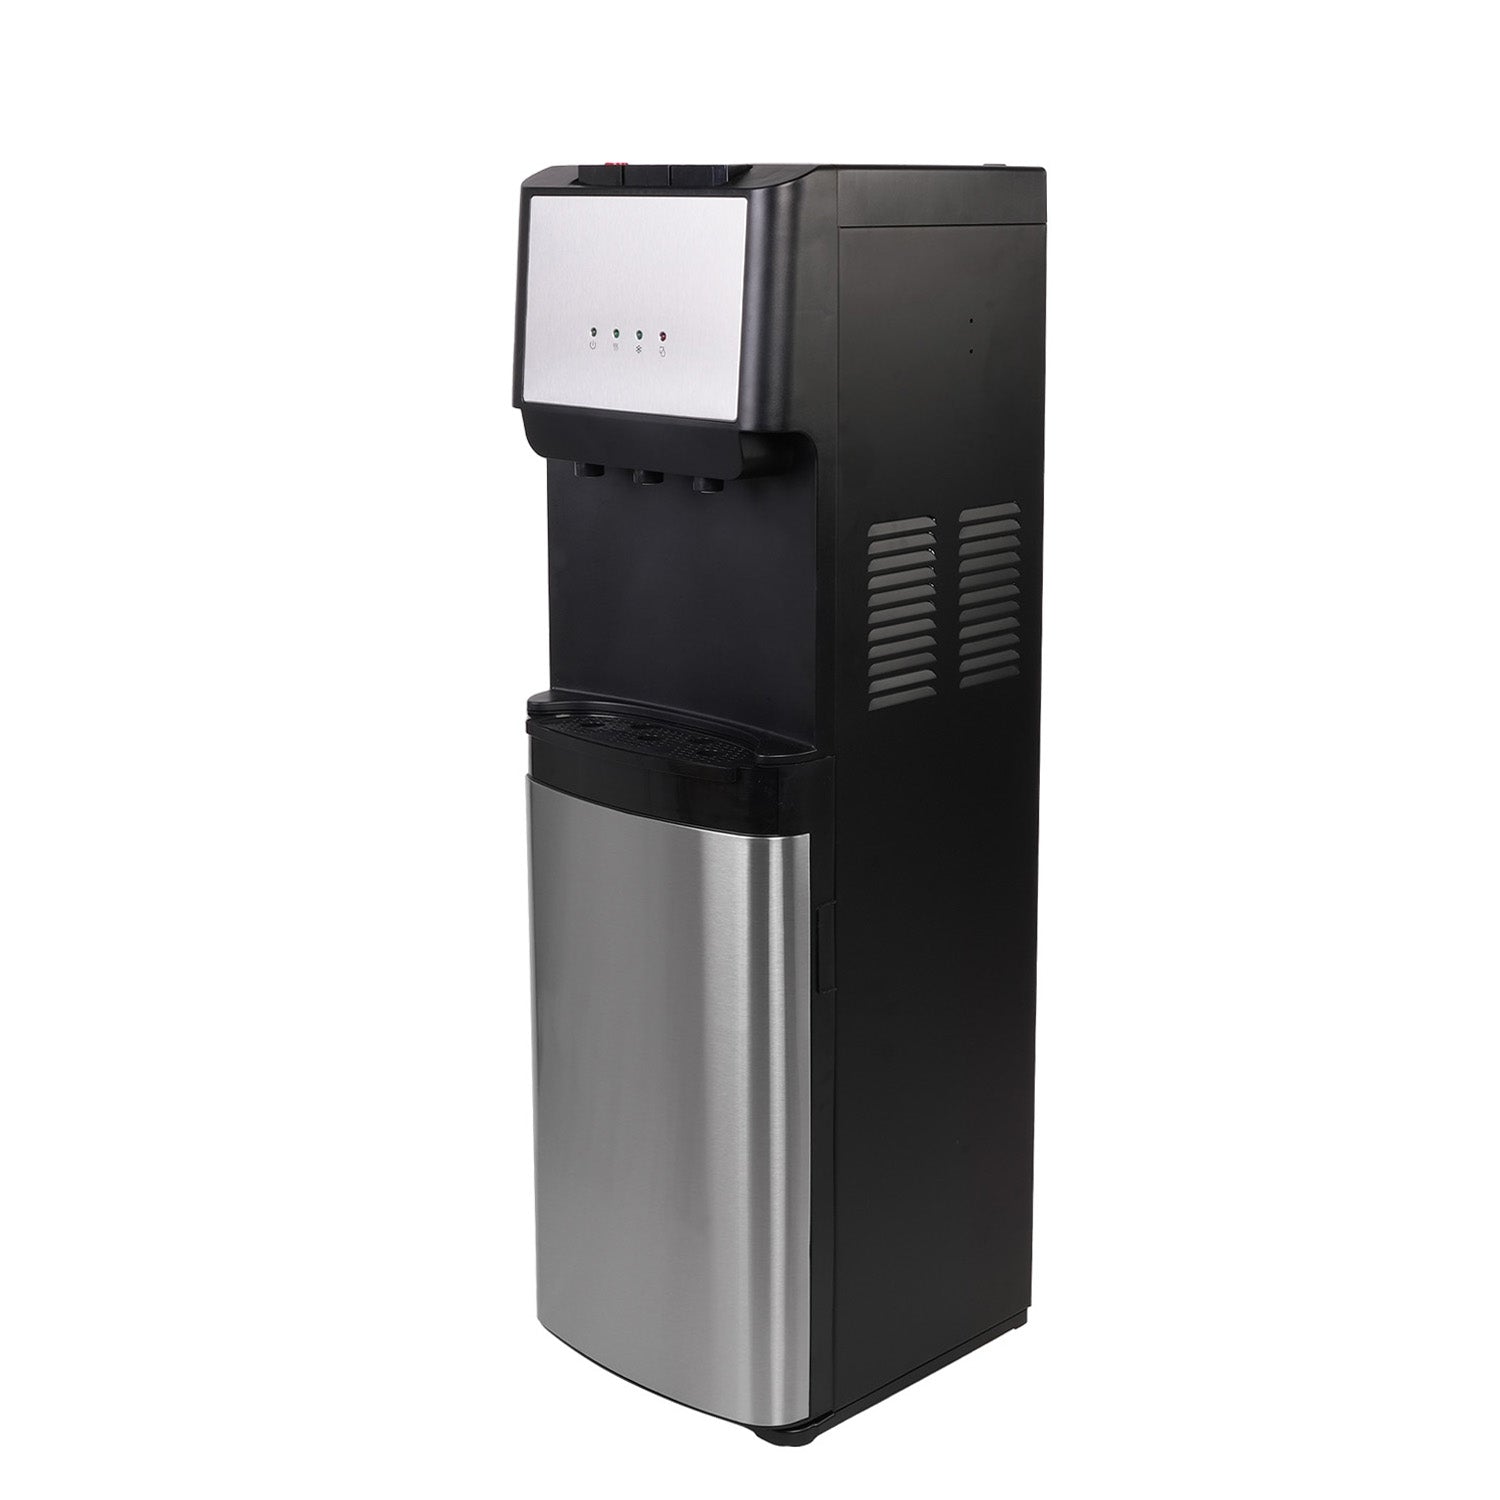 3-5 Gallon Bottom Loading Water Cooler Dispenser with 3-Temperature & Child Safety Lock, Black